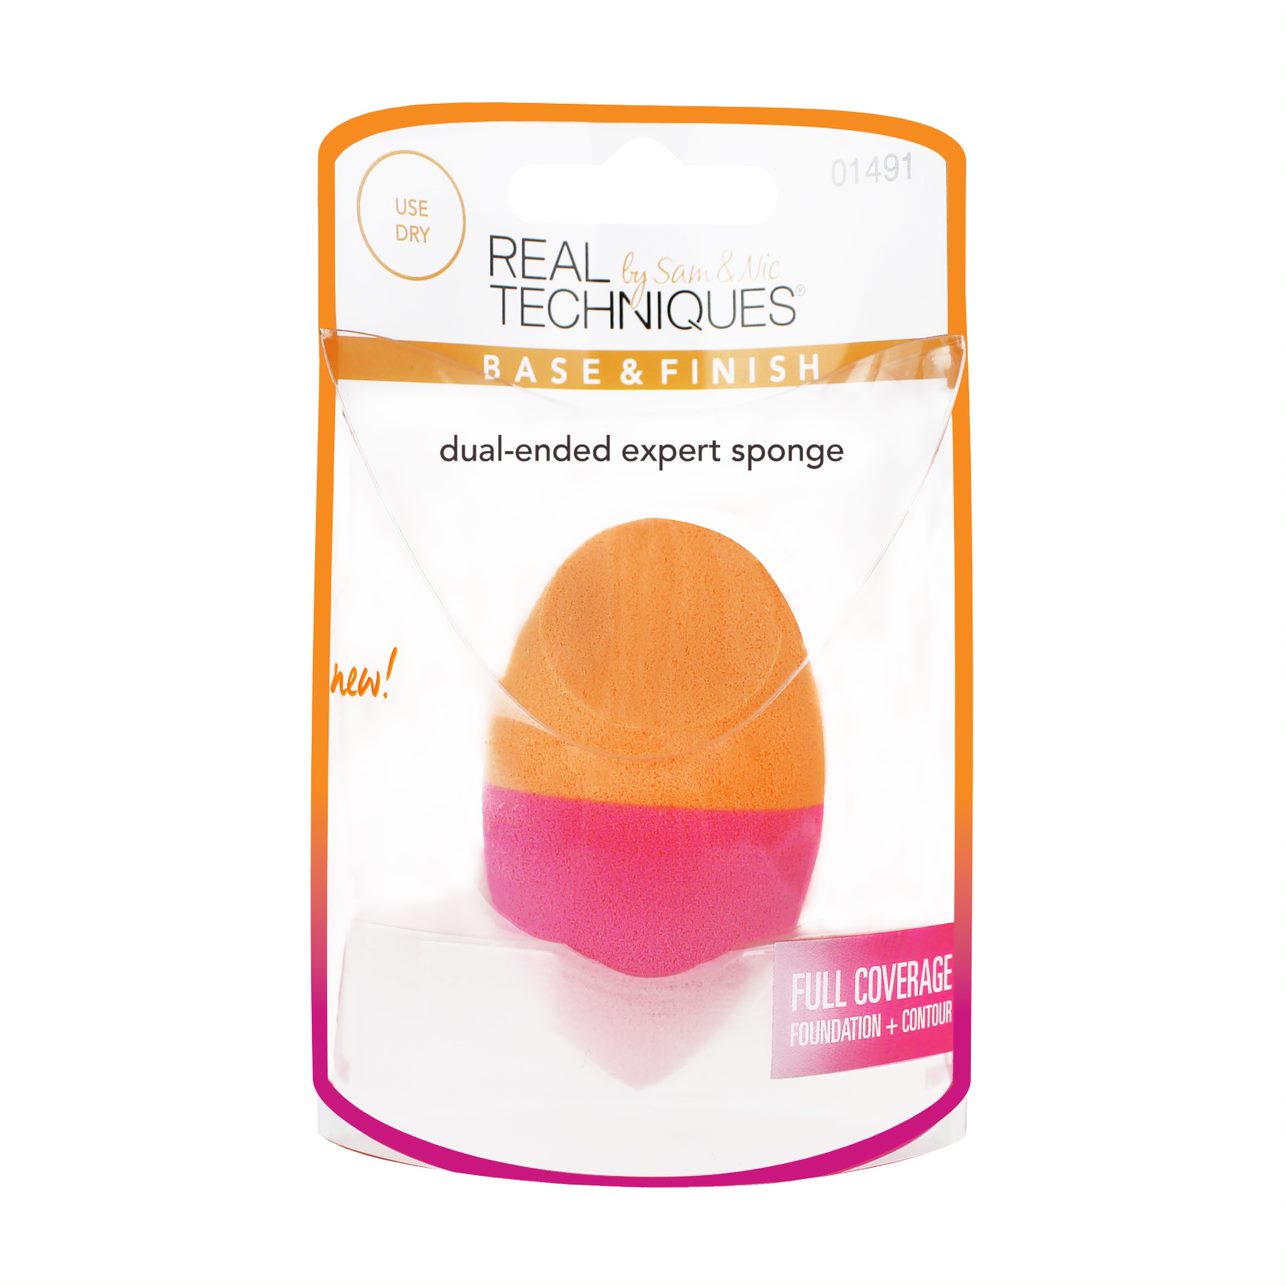 Real Techniques #1491 Dual Ended Expert Sponge